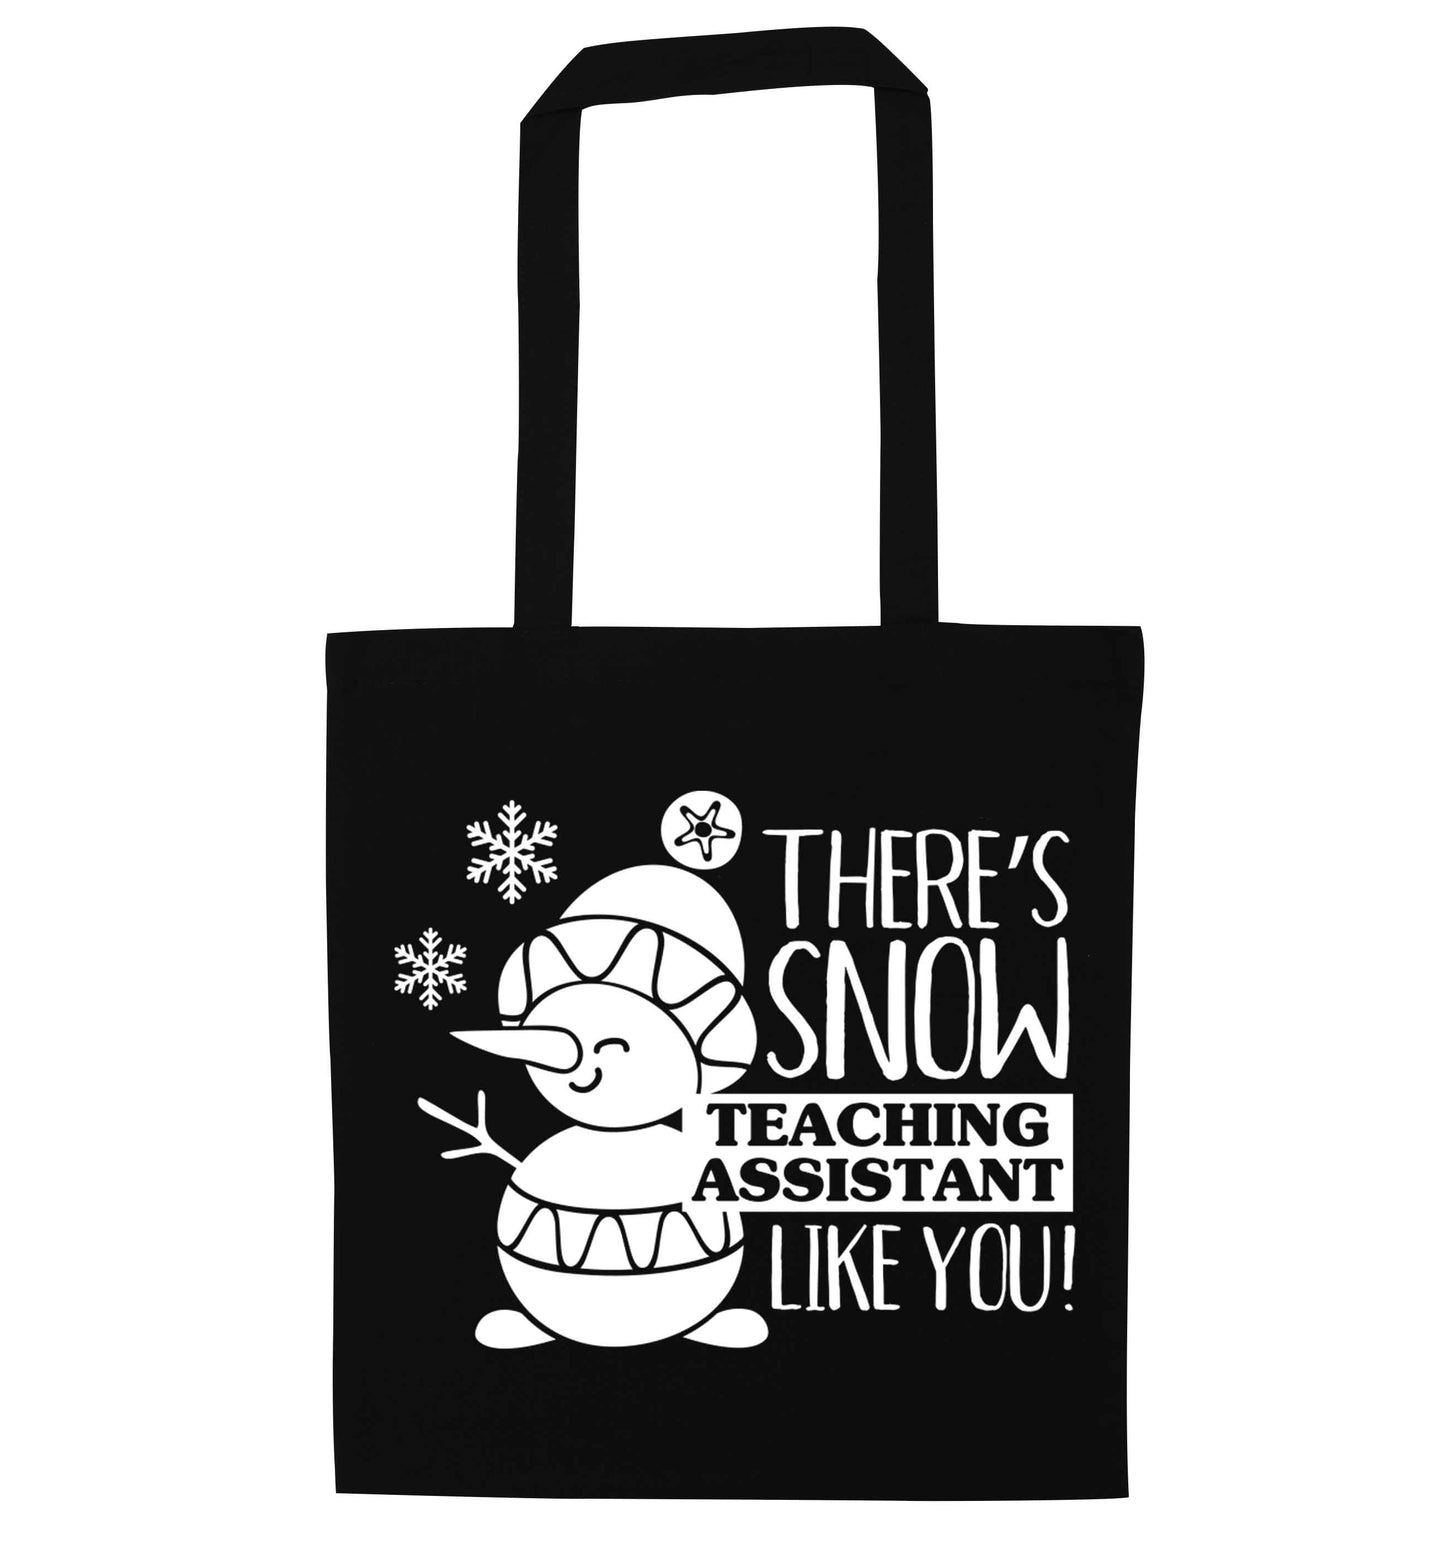 There's snow teaching assistant like you black tote bag